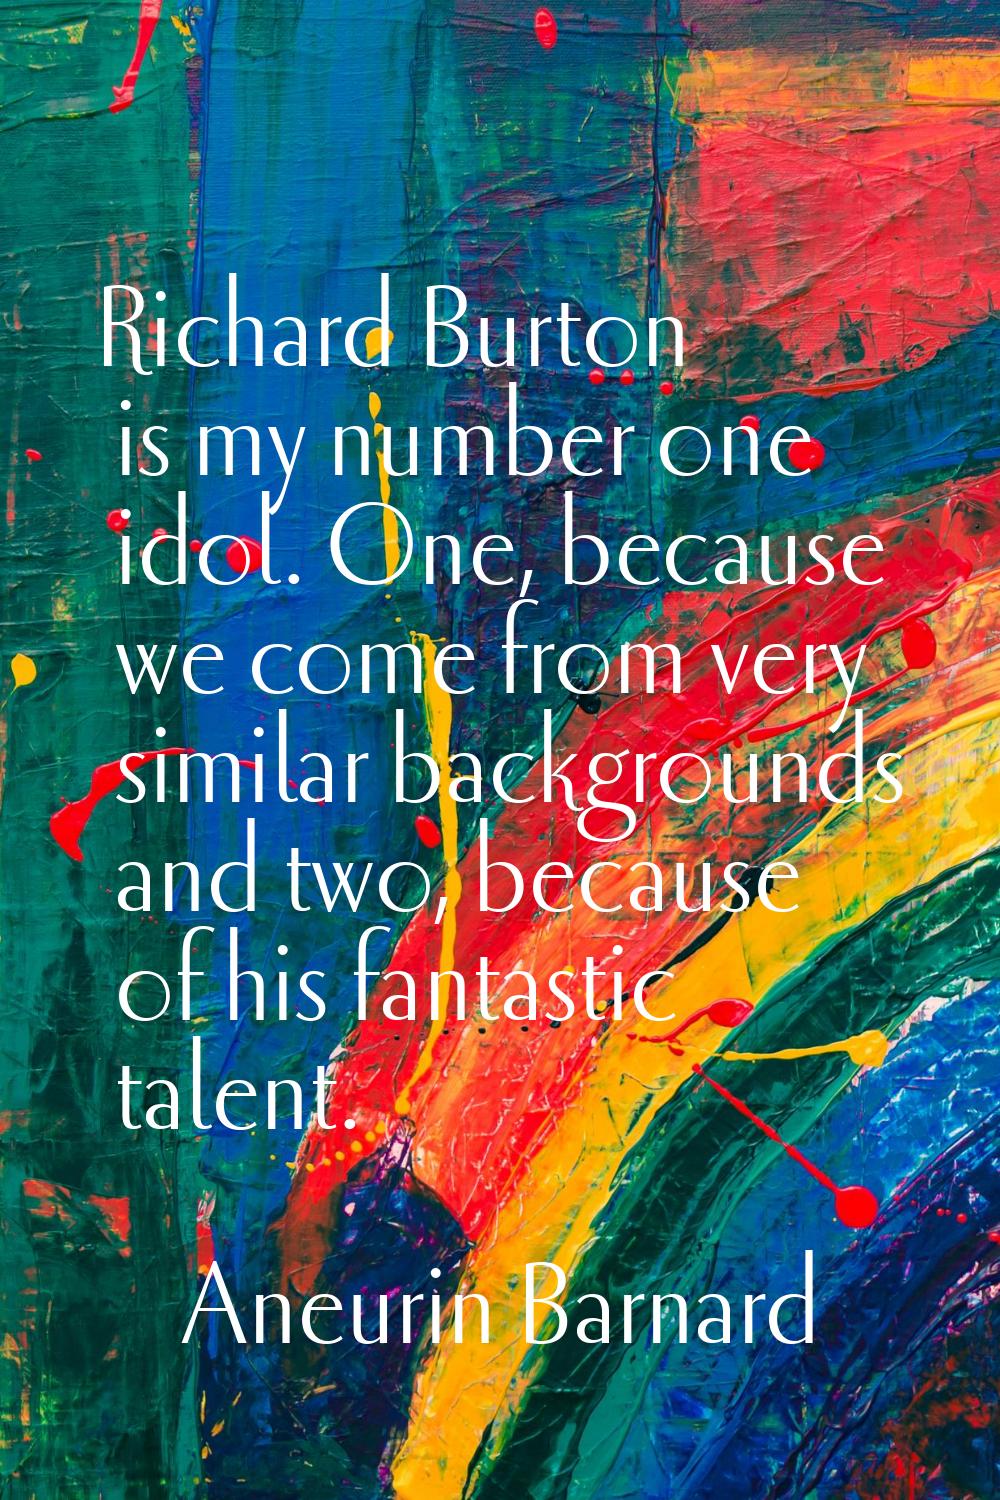 Richard Burton is my number one idol. One, because we come from very similar backgrounds and two, b